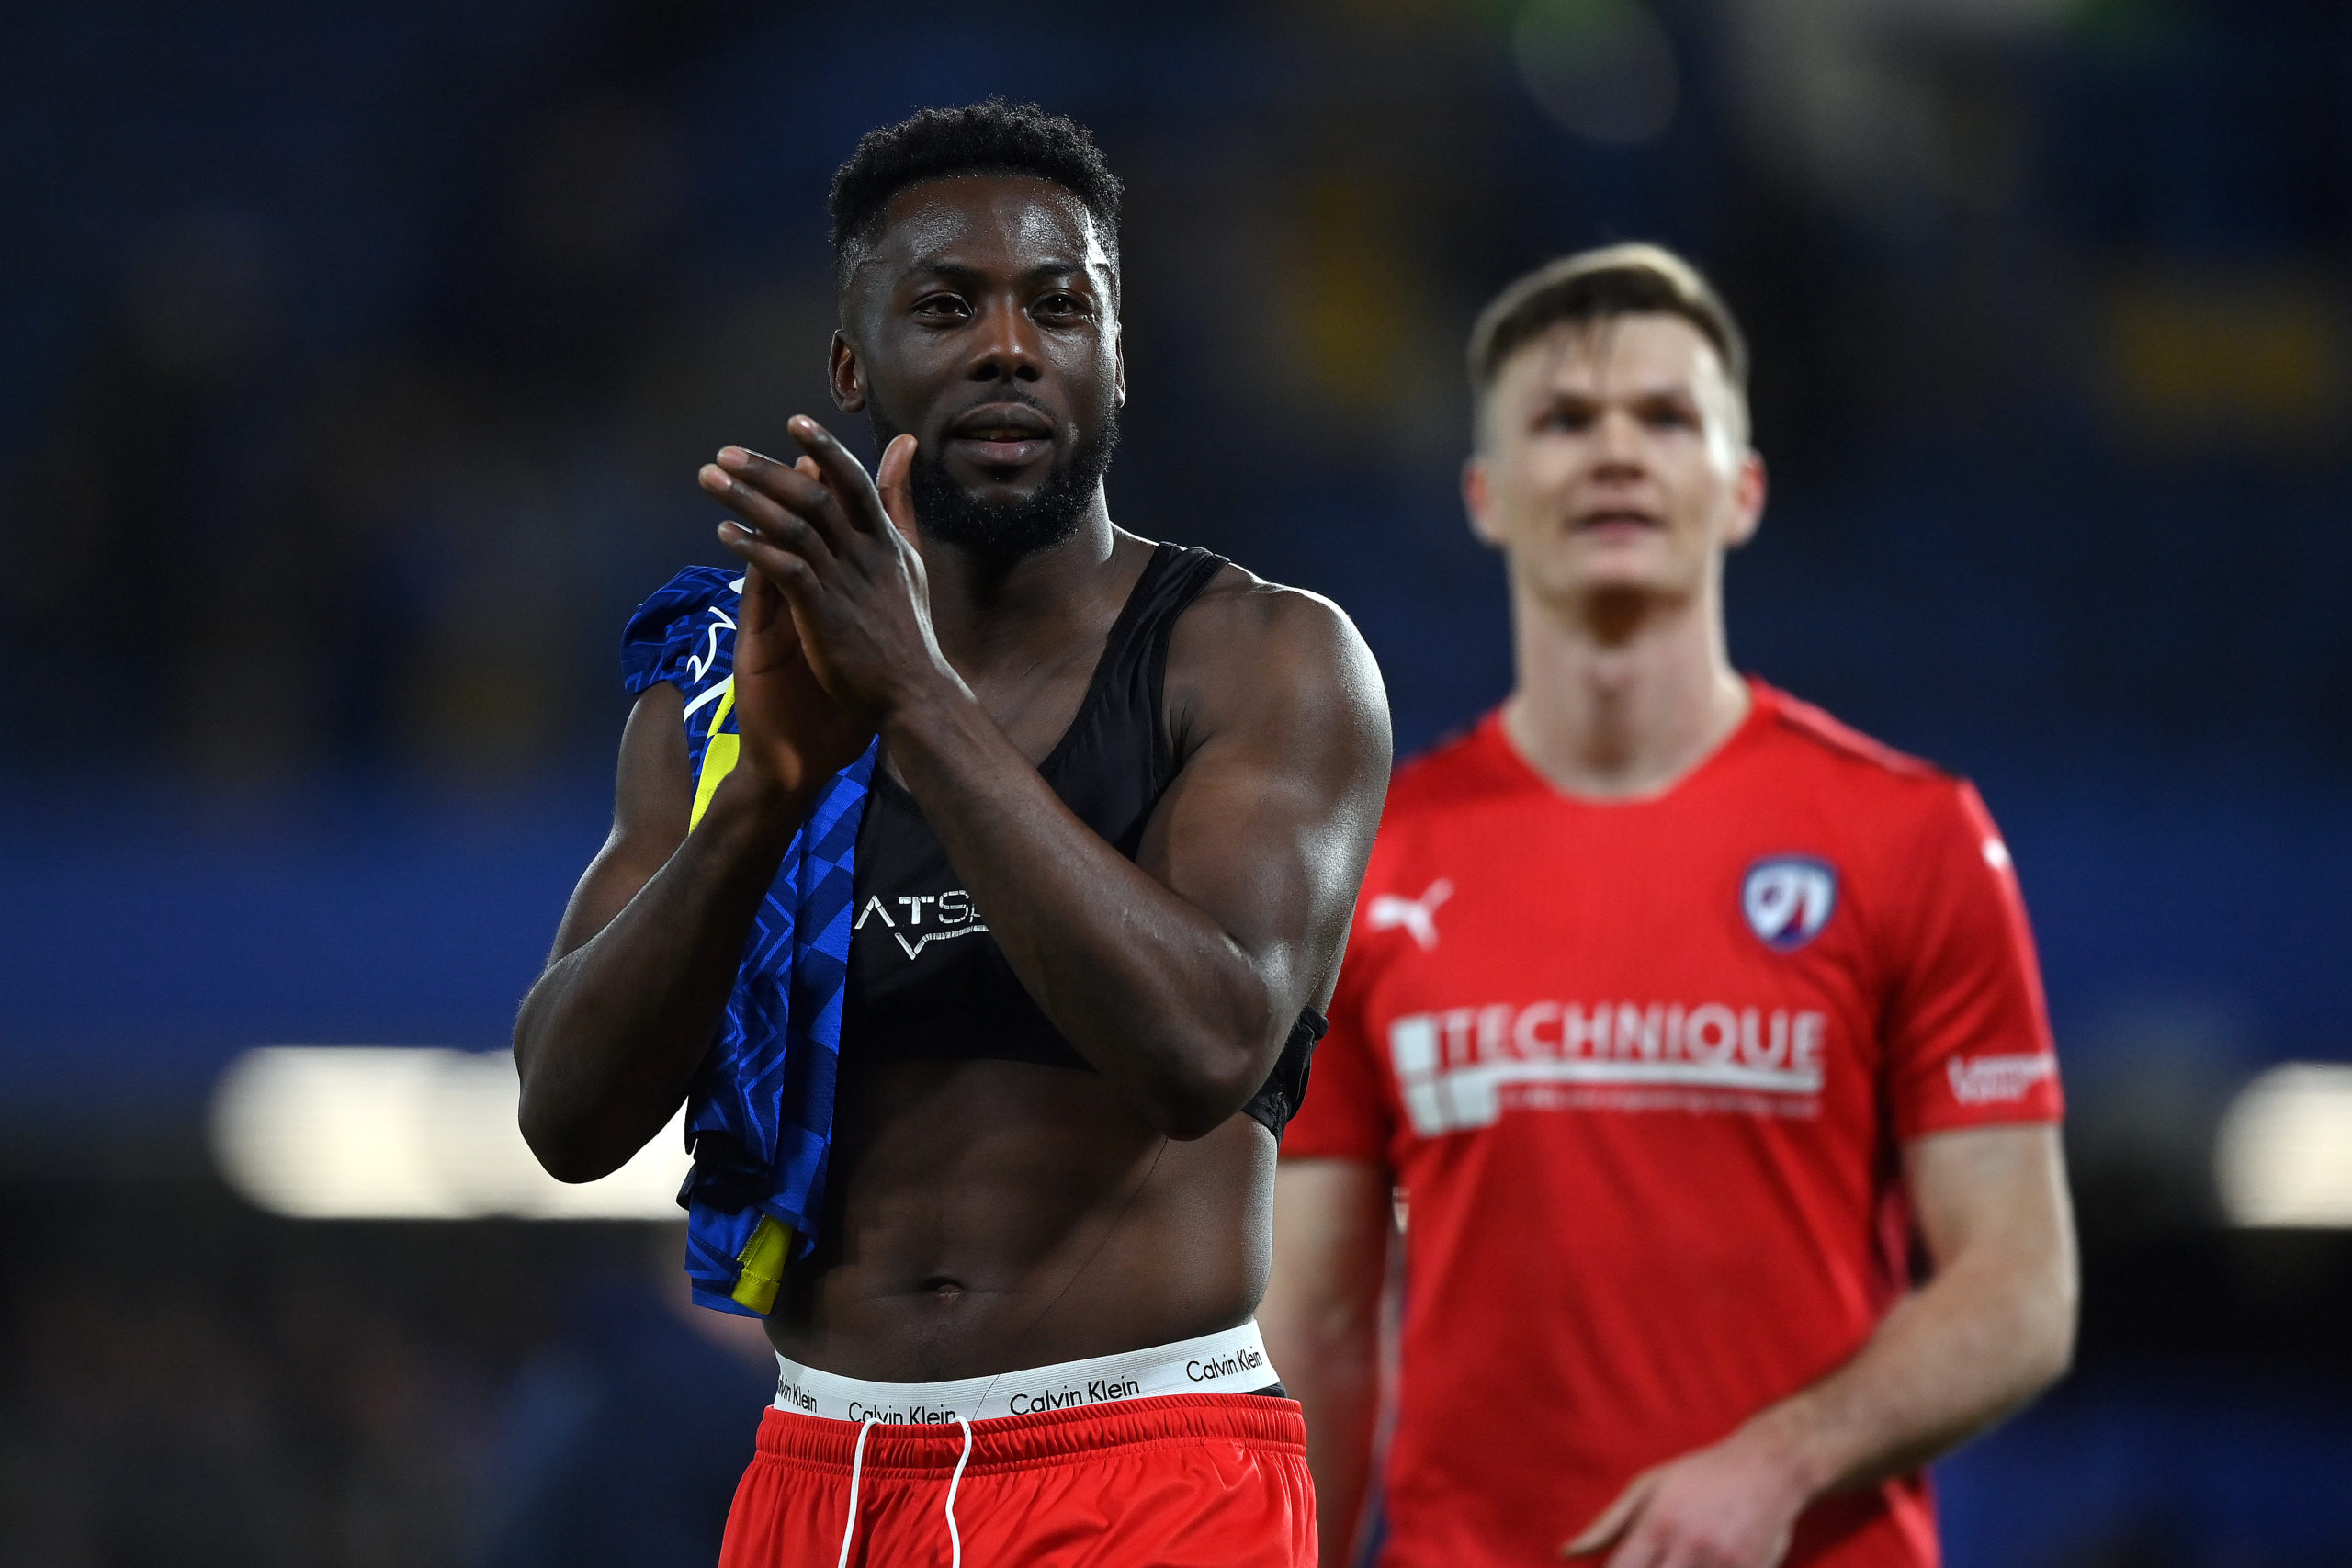 'Wanted his shirt': Chesterfield player shares which Chelsea star he aimed to swap kits with after the FA Cup tie